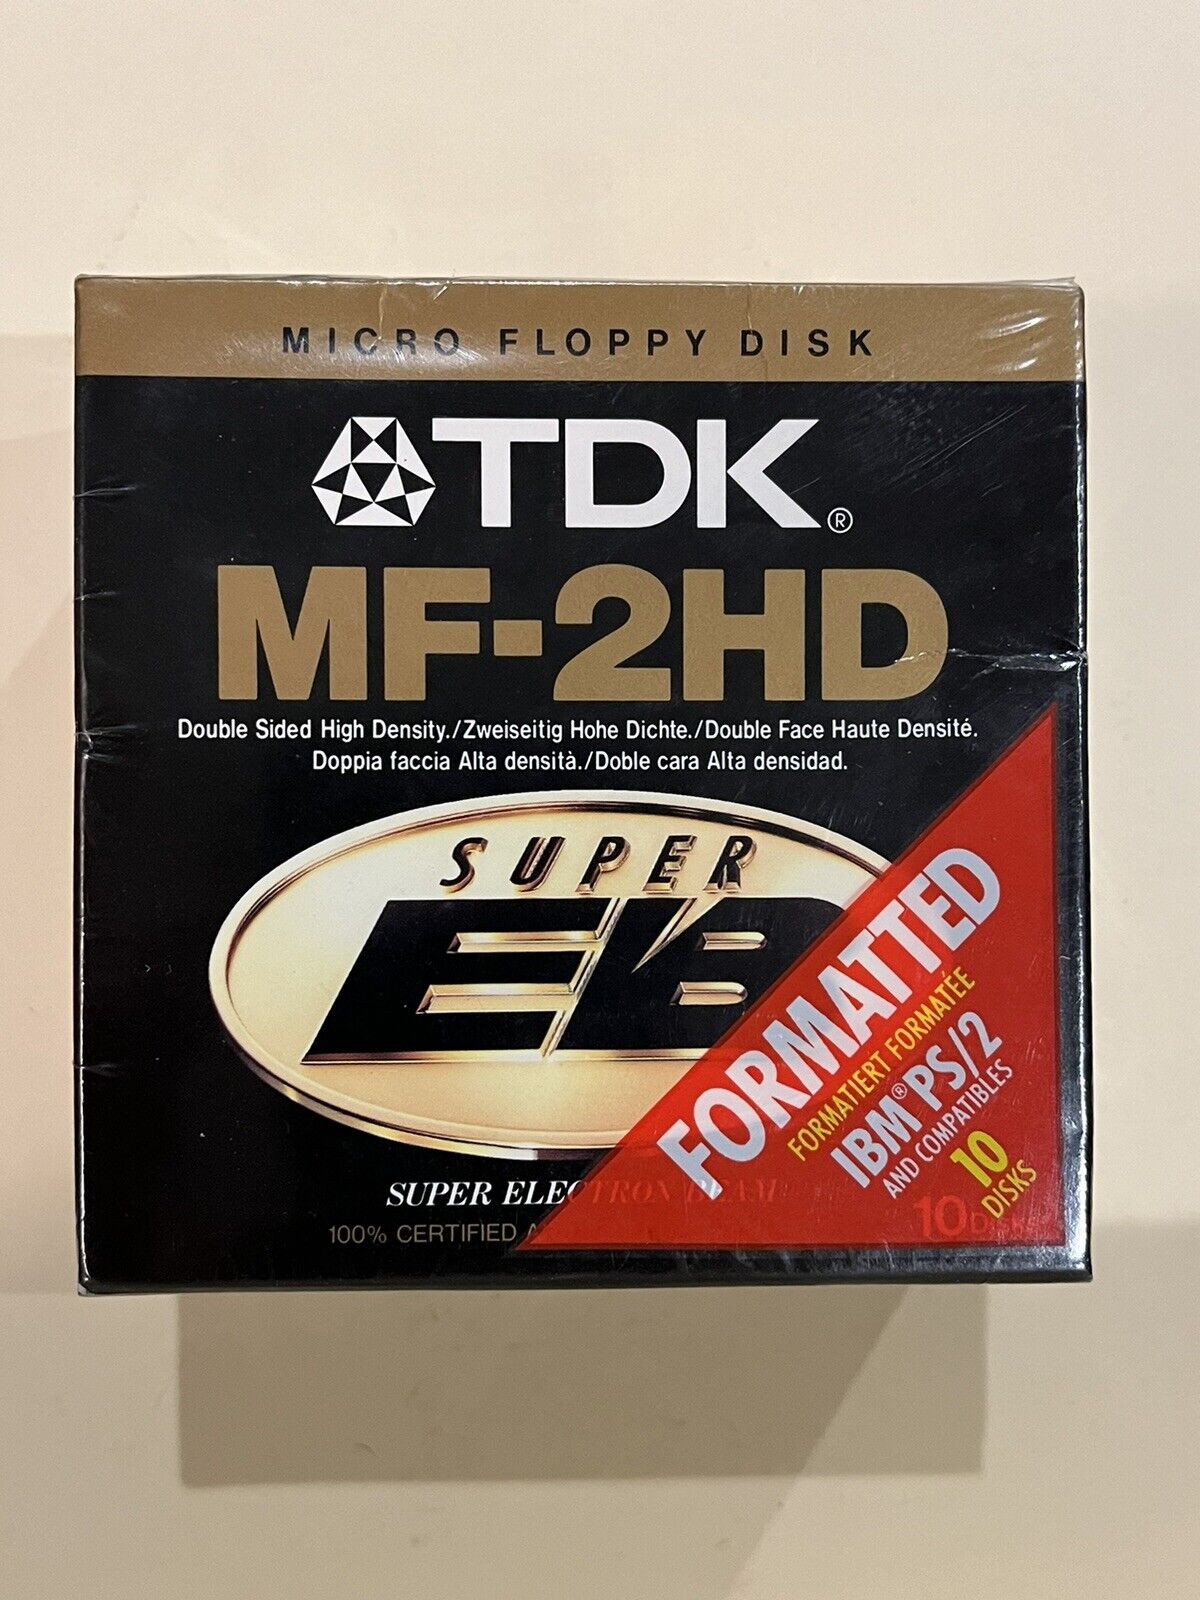 TDK MF-2HD Micro Floppy Disk Super EB 10-Pack Formatted IBM PS2 Compatibles NEW